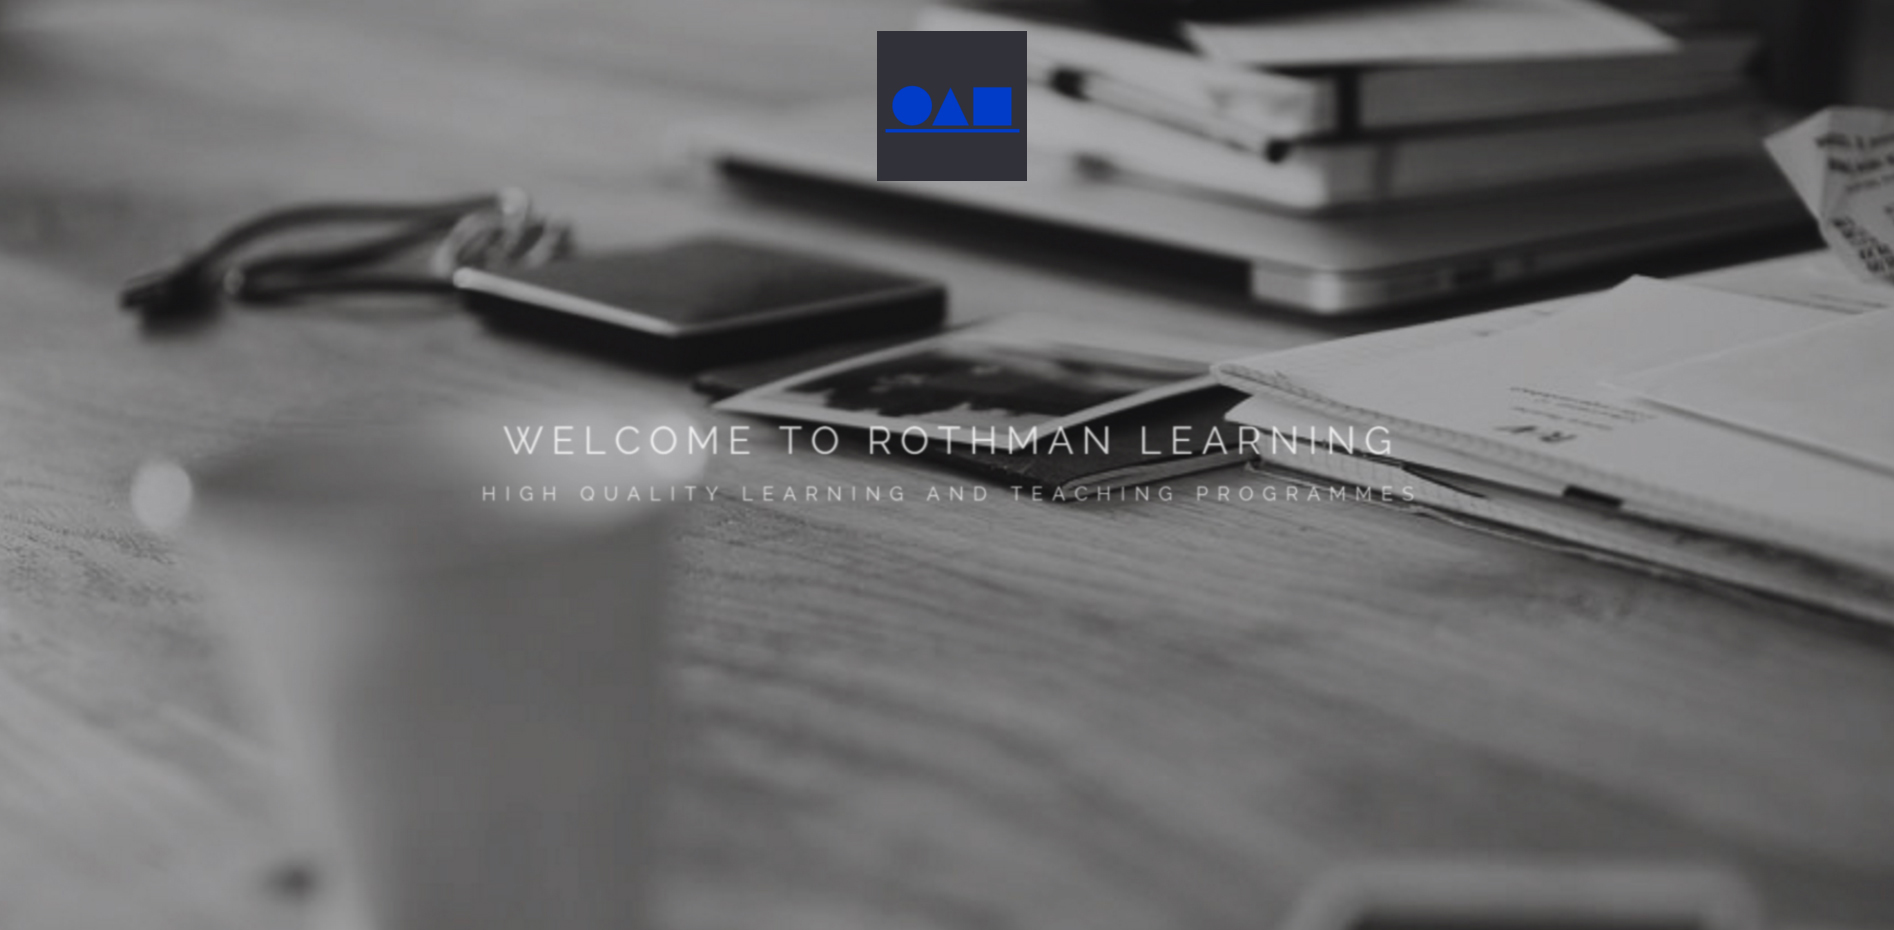 Rothman Learning Site Launch